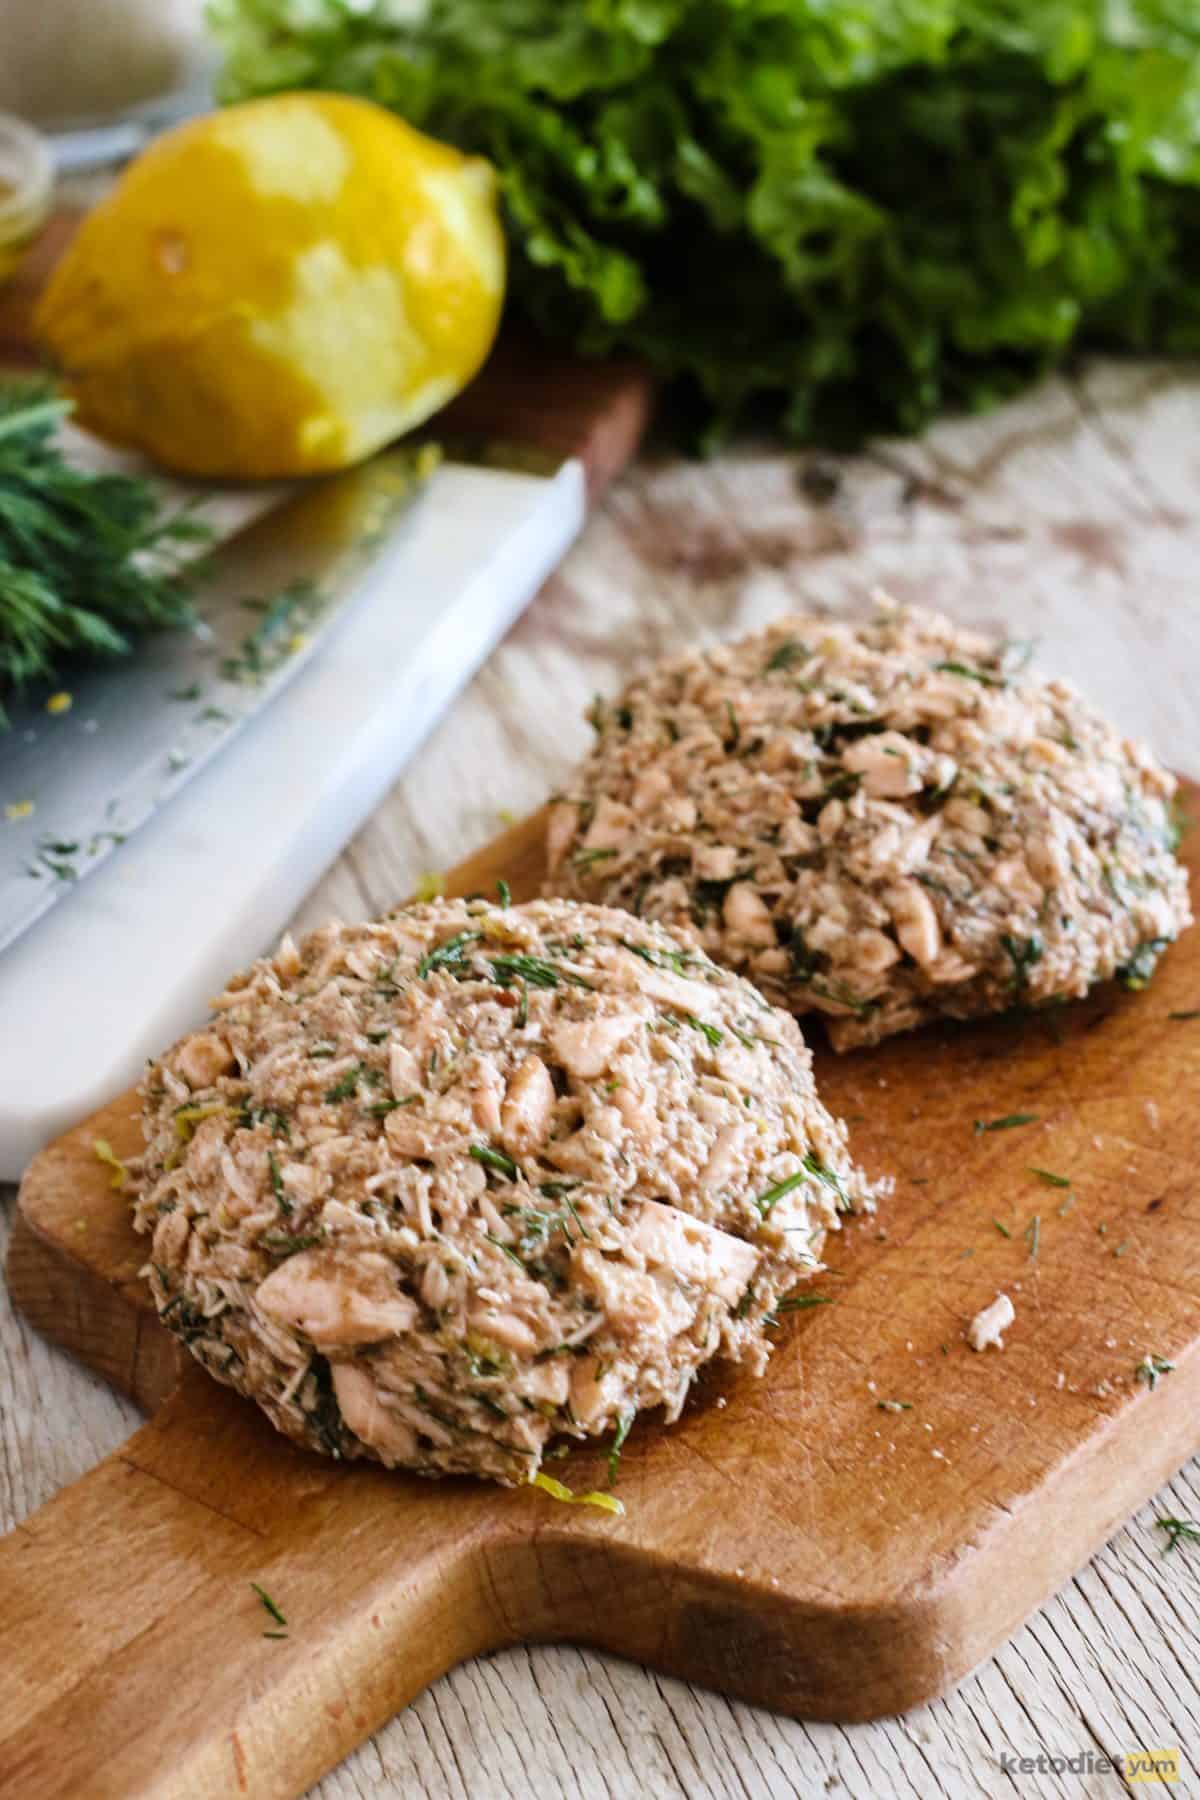 Salmon burger mixture shaped into burgers and ready to cook